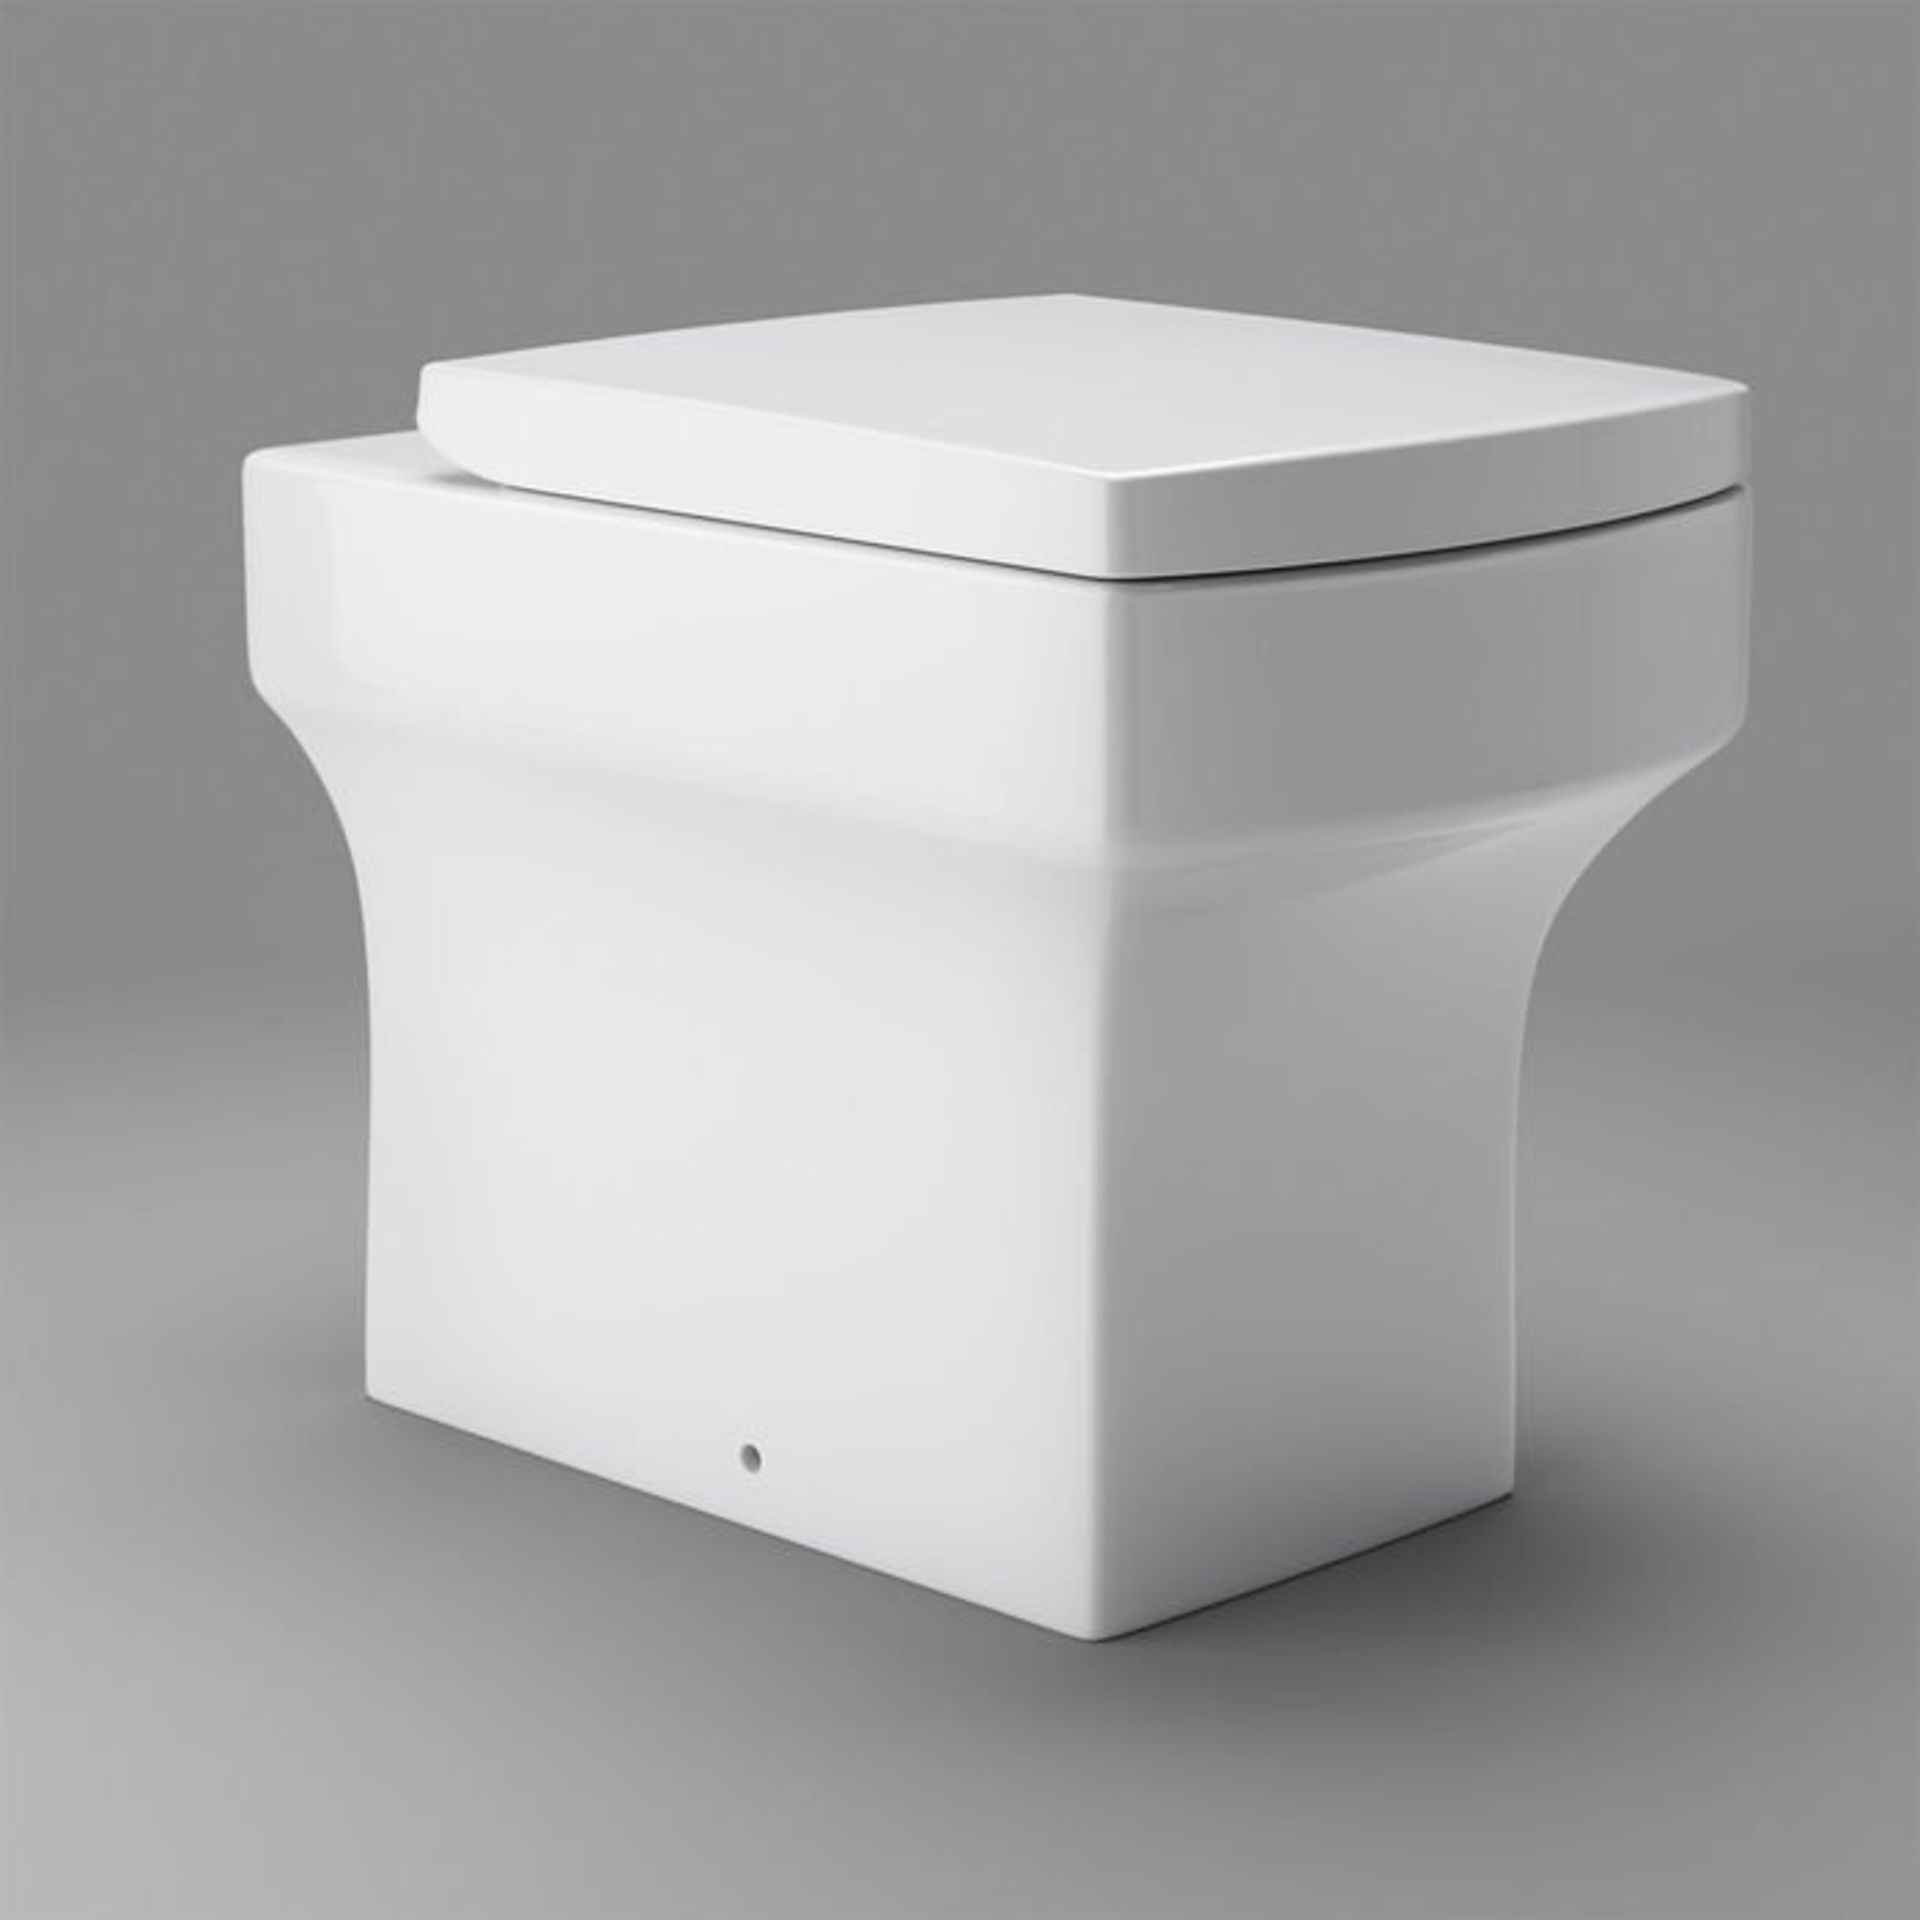 (M135) Belfort Back to Wall Toilet inc Soft Close Seat. Made from White Vitreous China Anti- - Image 3 of 3